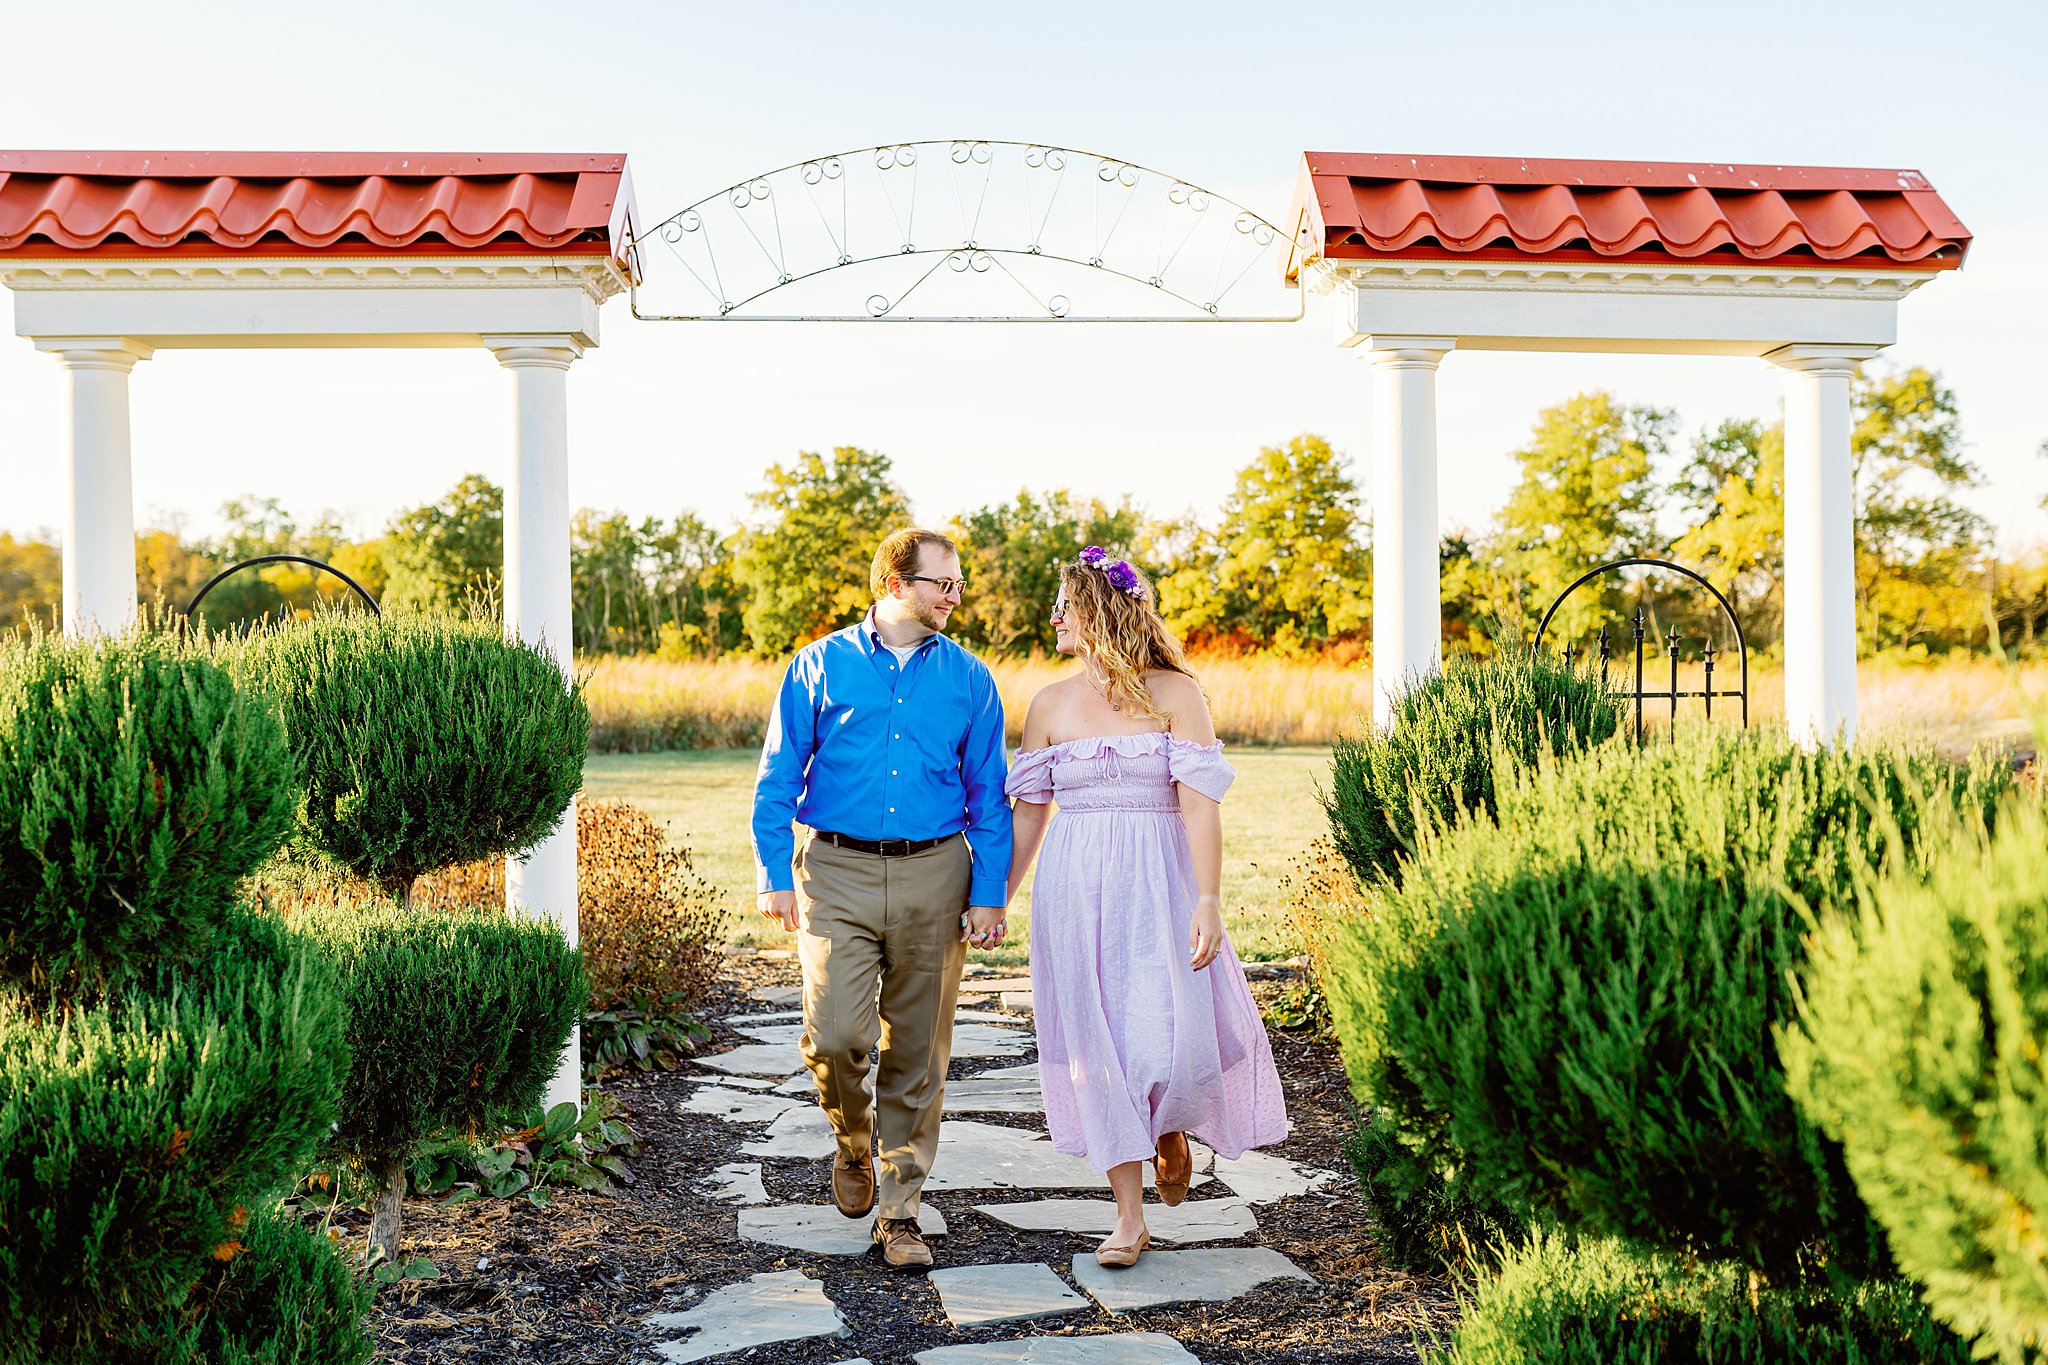 A young couple walks along a stone path under columns archway in a garden places to take pictures in dayton ohio